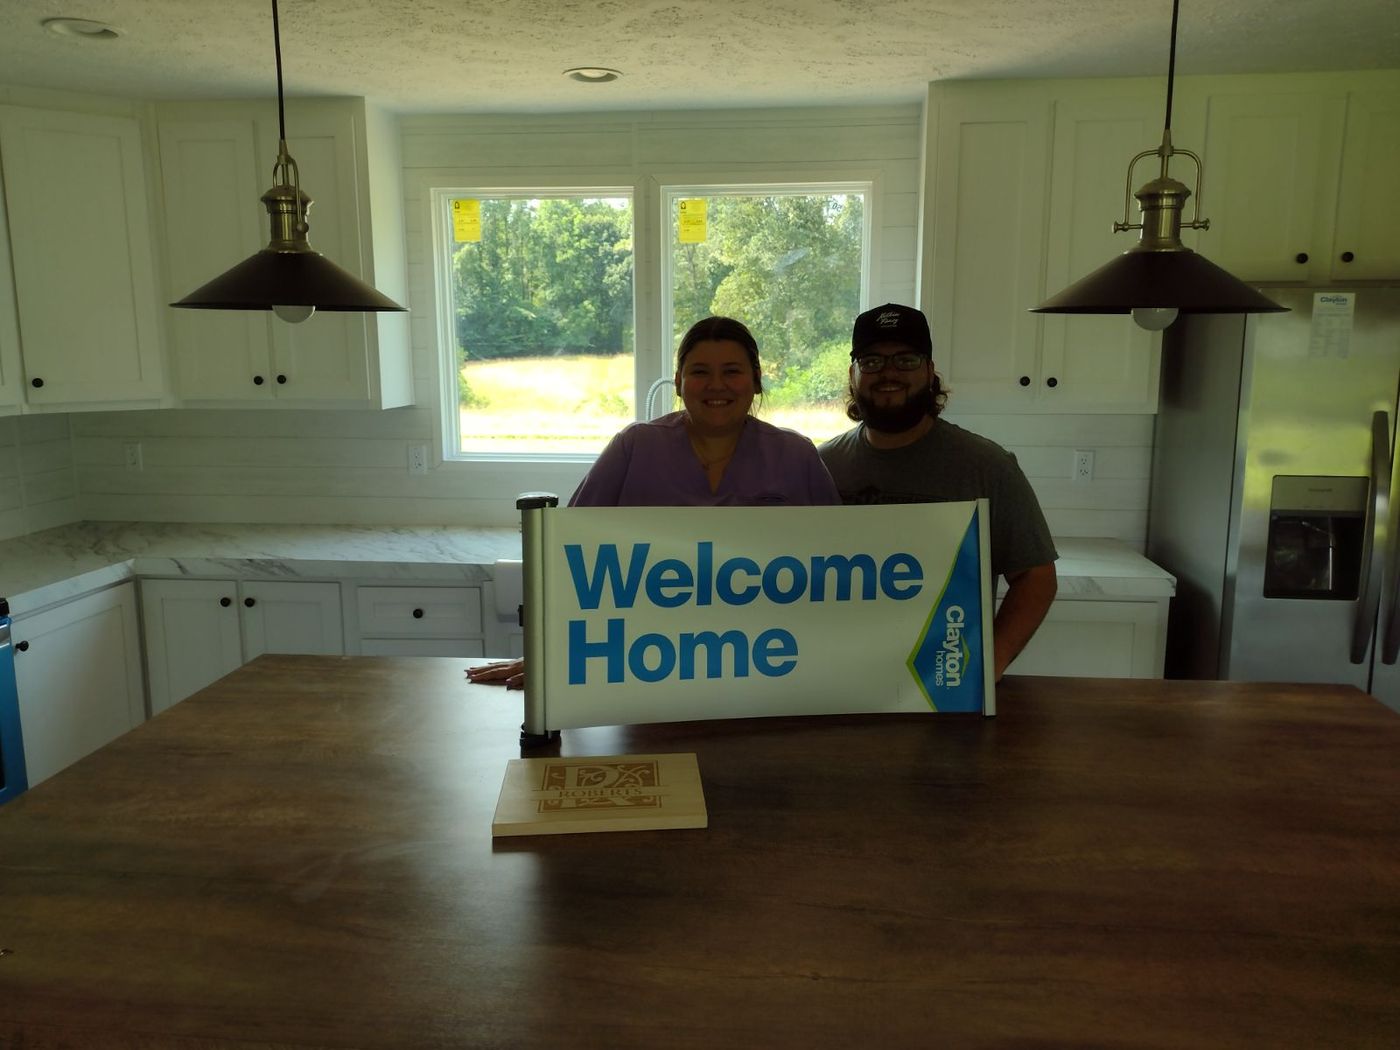 DARRIN R. welcome home image